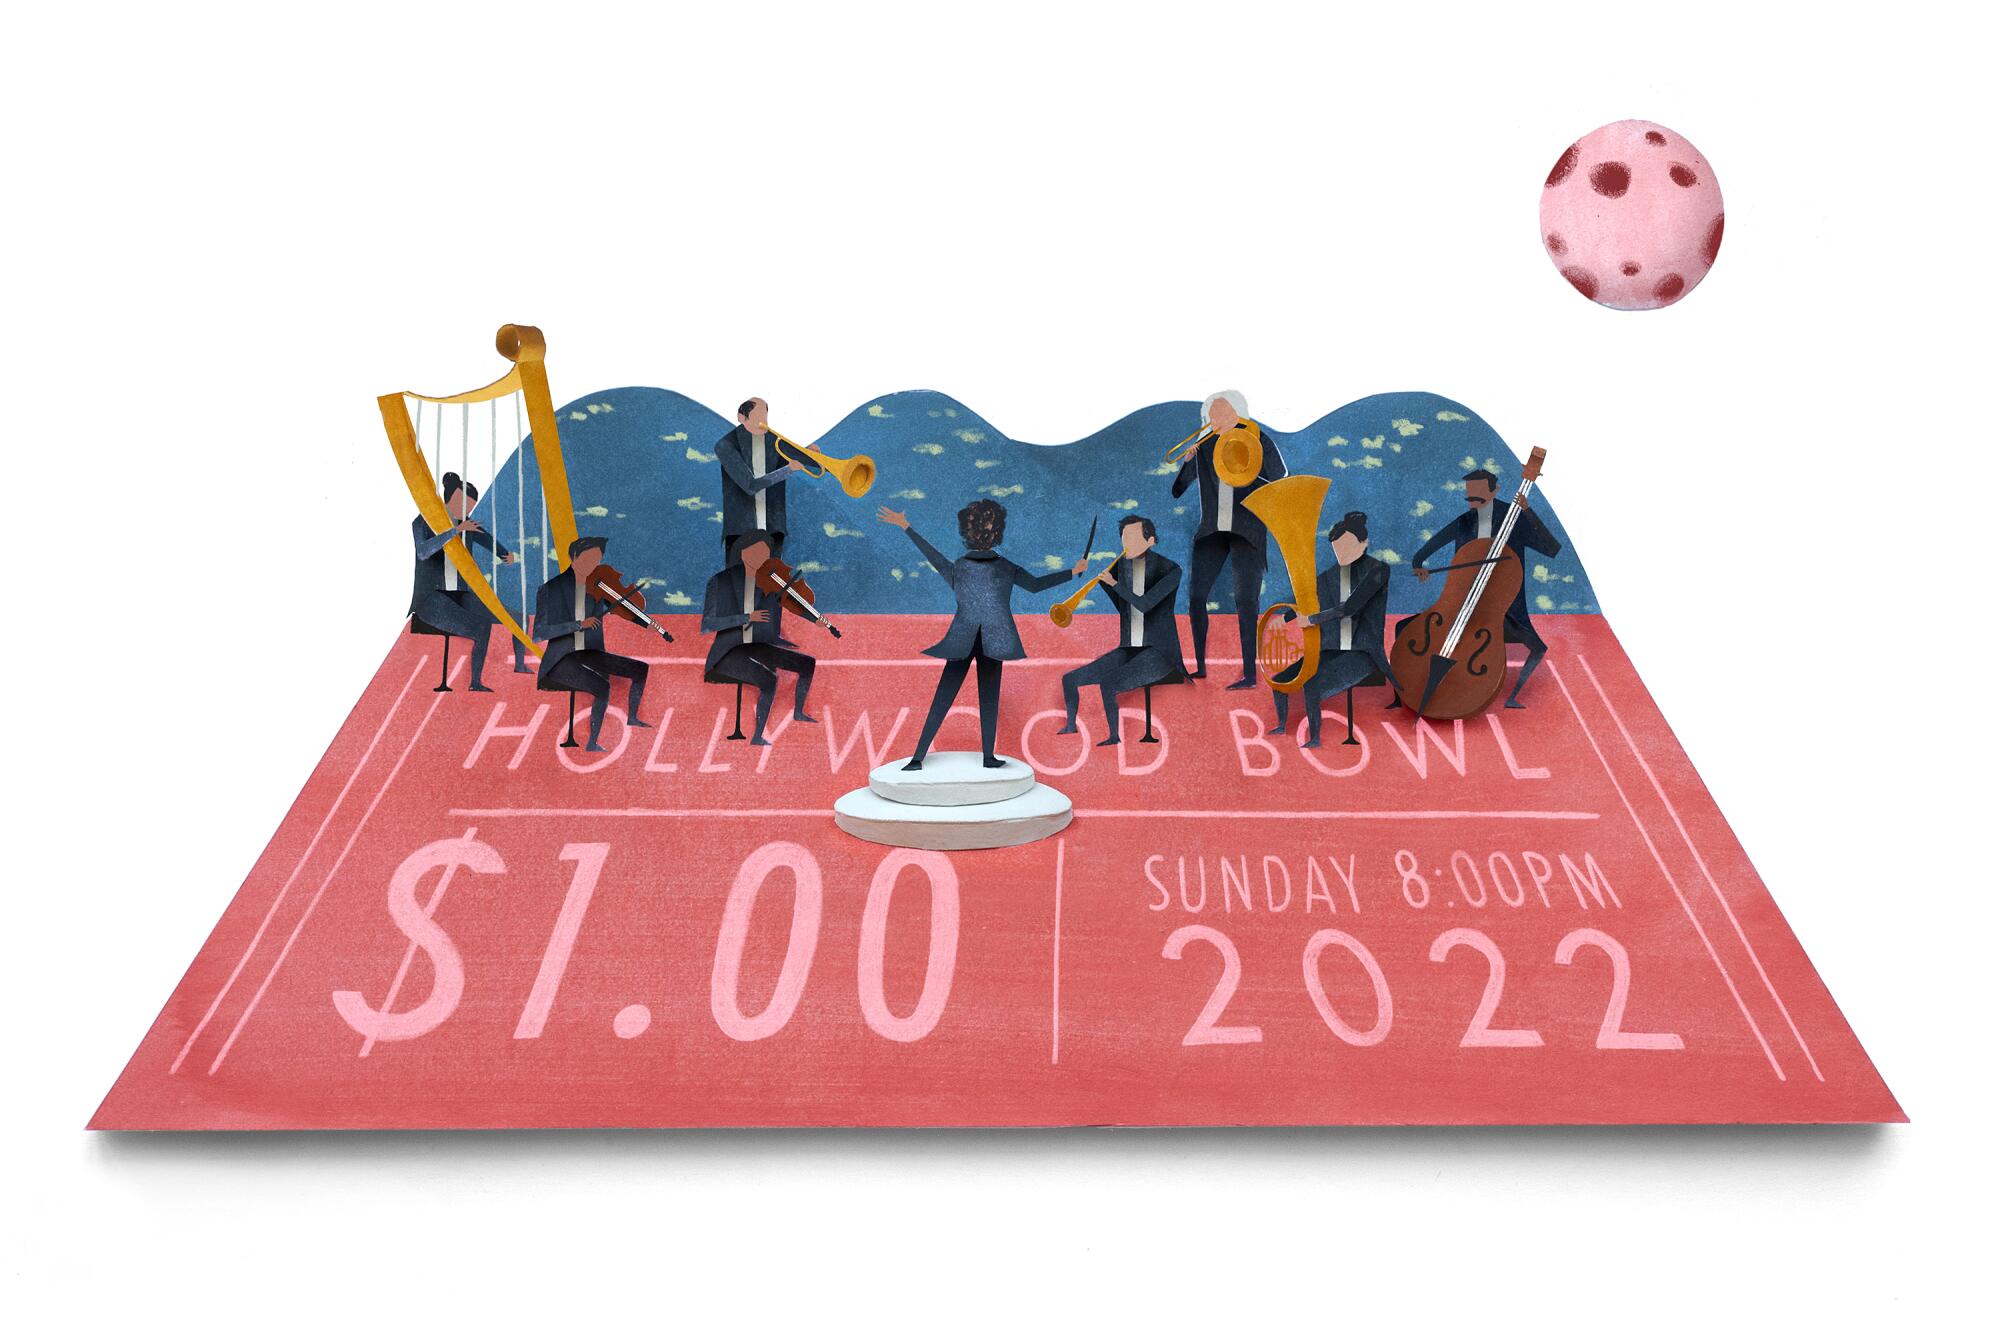 Illustration showing a Hollywood Bowl $1 ticket with tiny orchestra